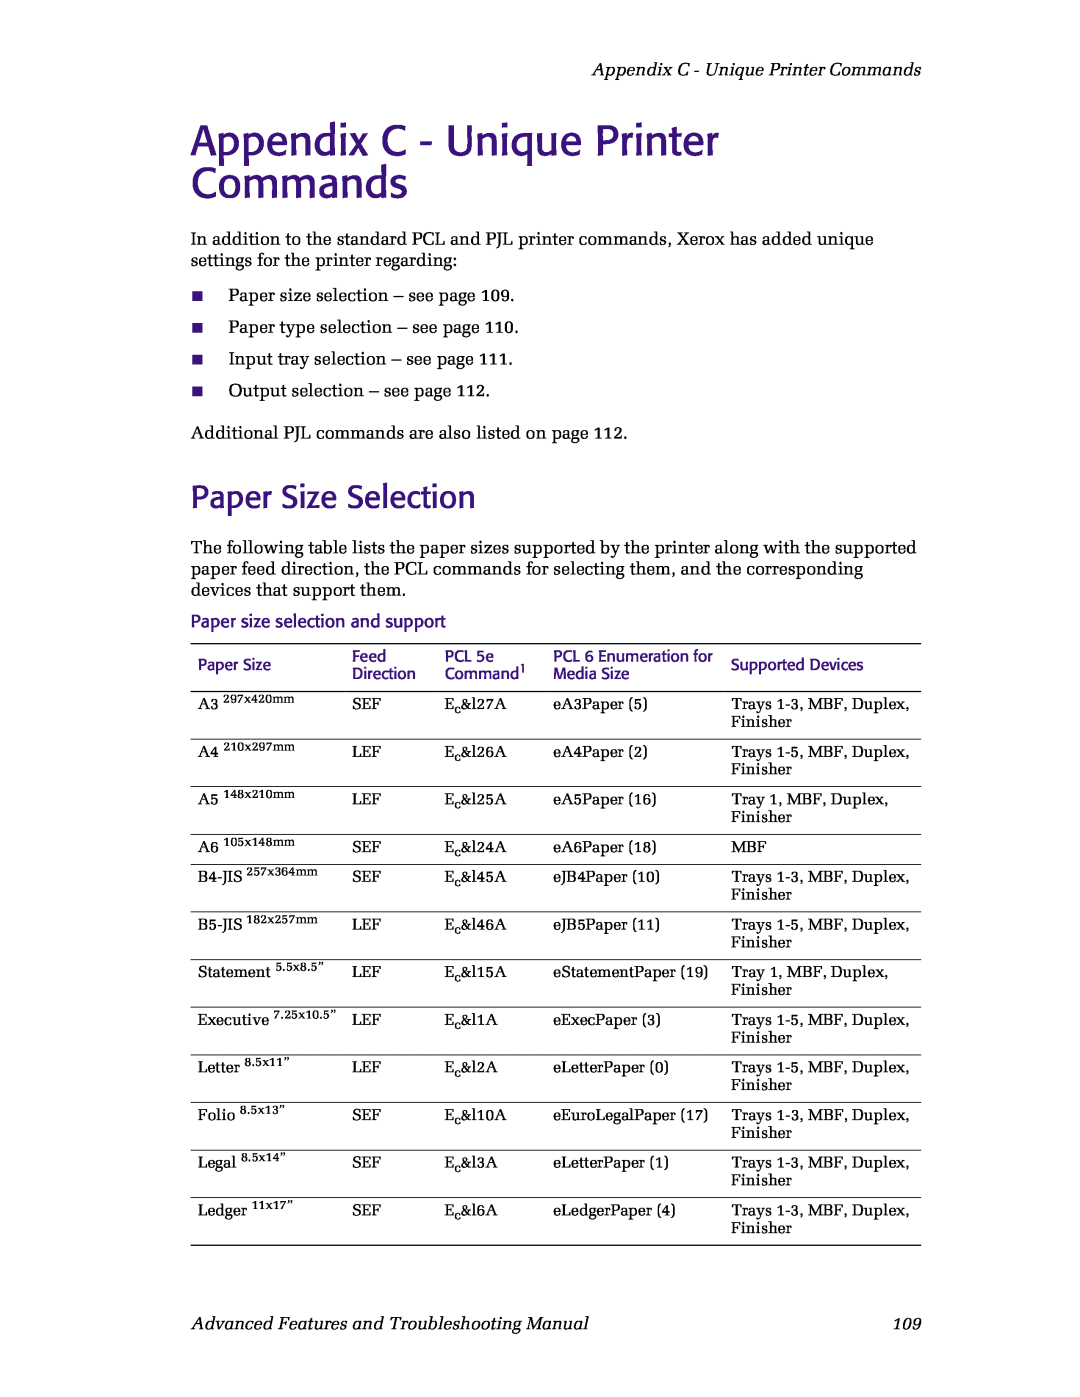 Xerox N4525 manual Appendix C - Unique Printer Commands, Paper Size Selection, Paper size selection and support 